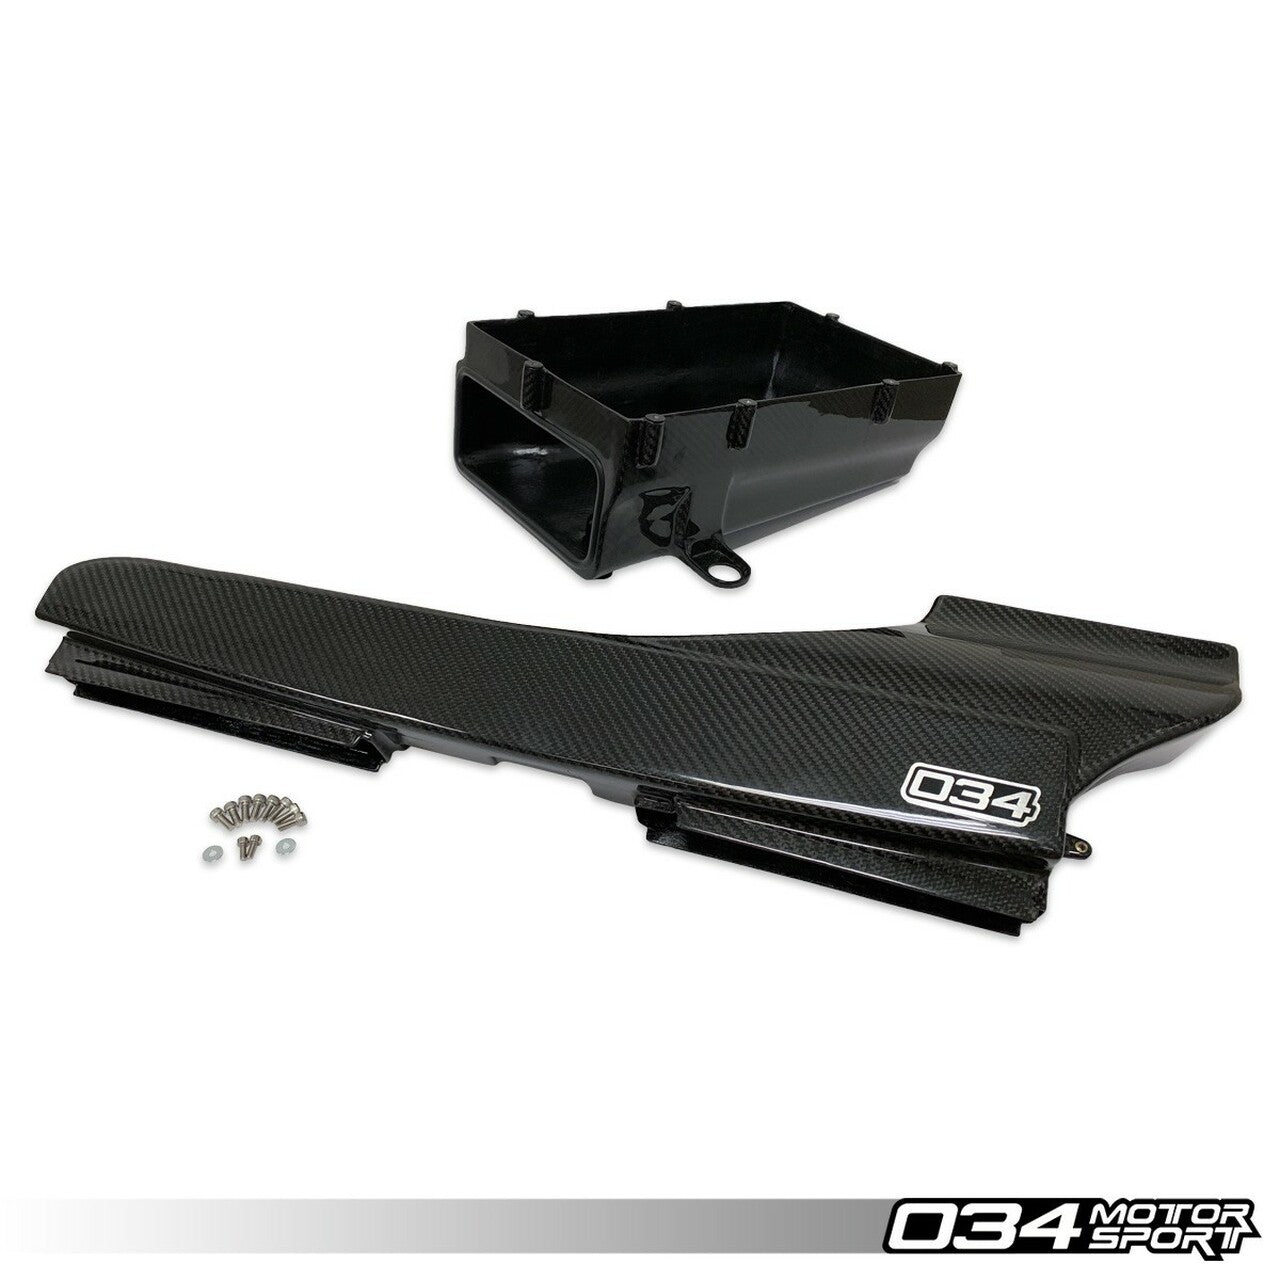 034Motorsport Carbon Fibre Lower Intake Box + Air Duct - TTRS 8S/RS3 8V Daza - Wayside Performance